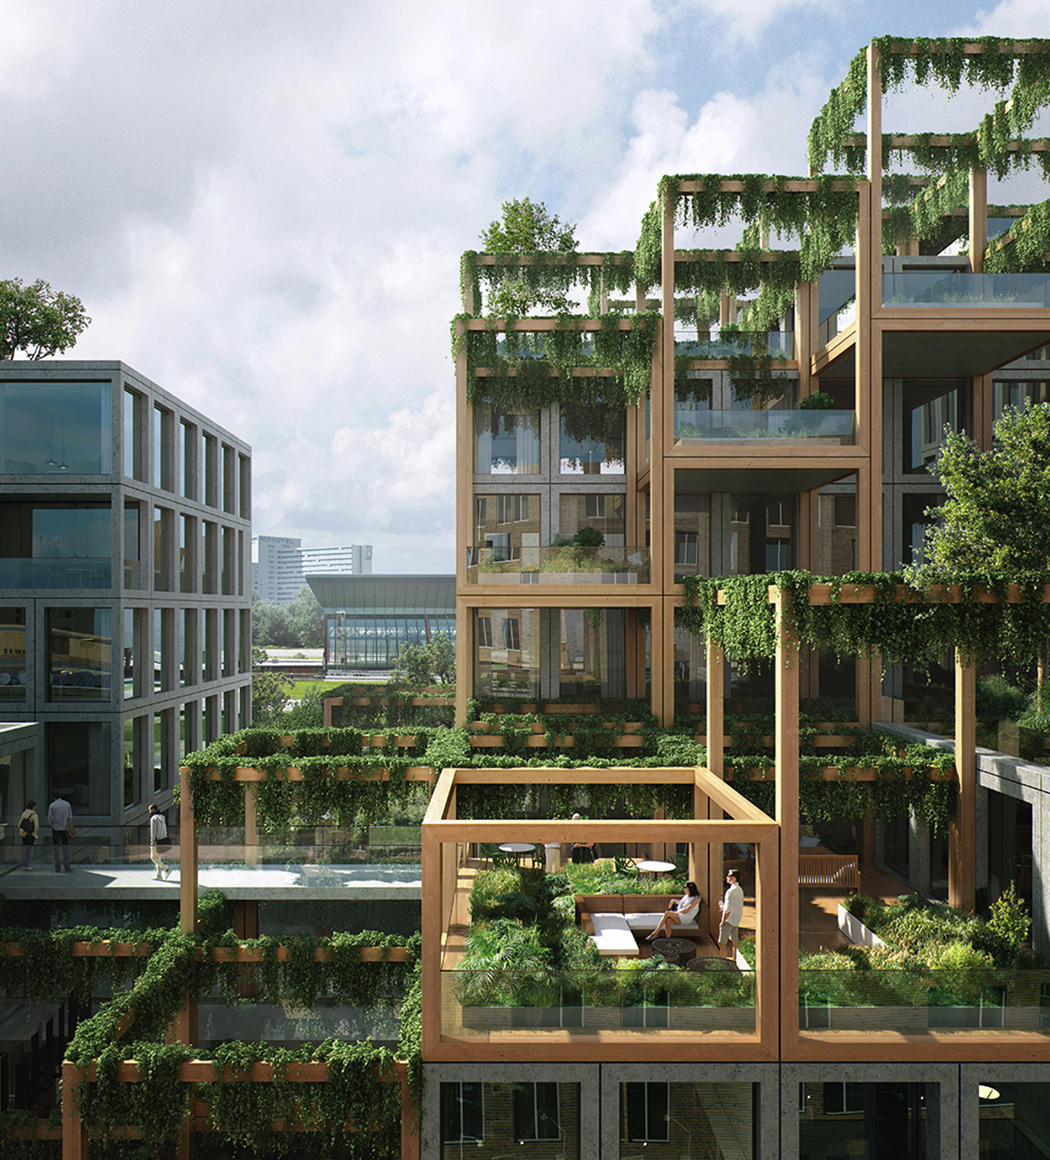 Architectural designs that focus on humans and nature alike! - Yanko Design